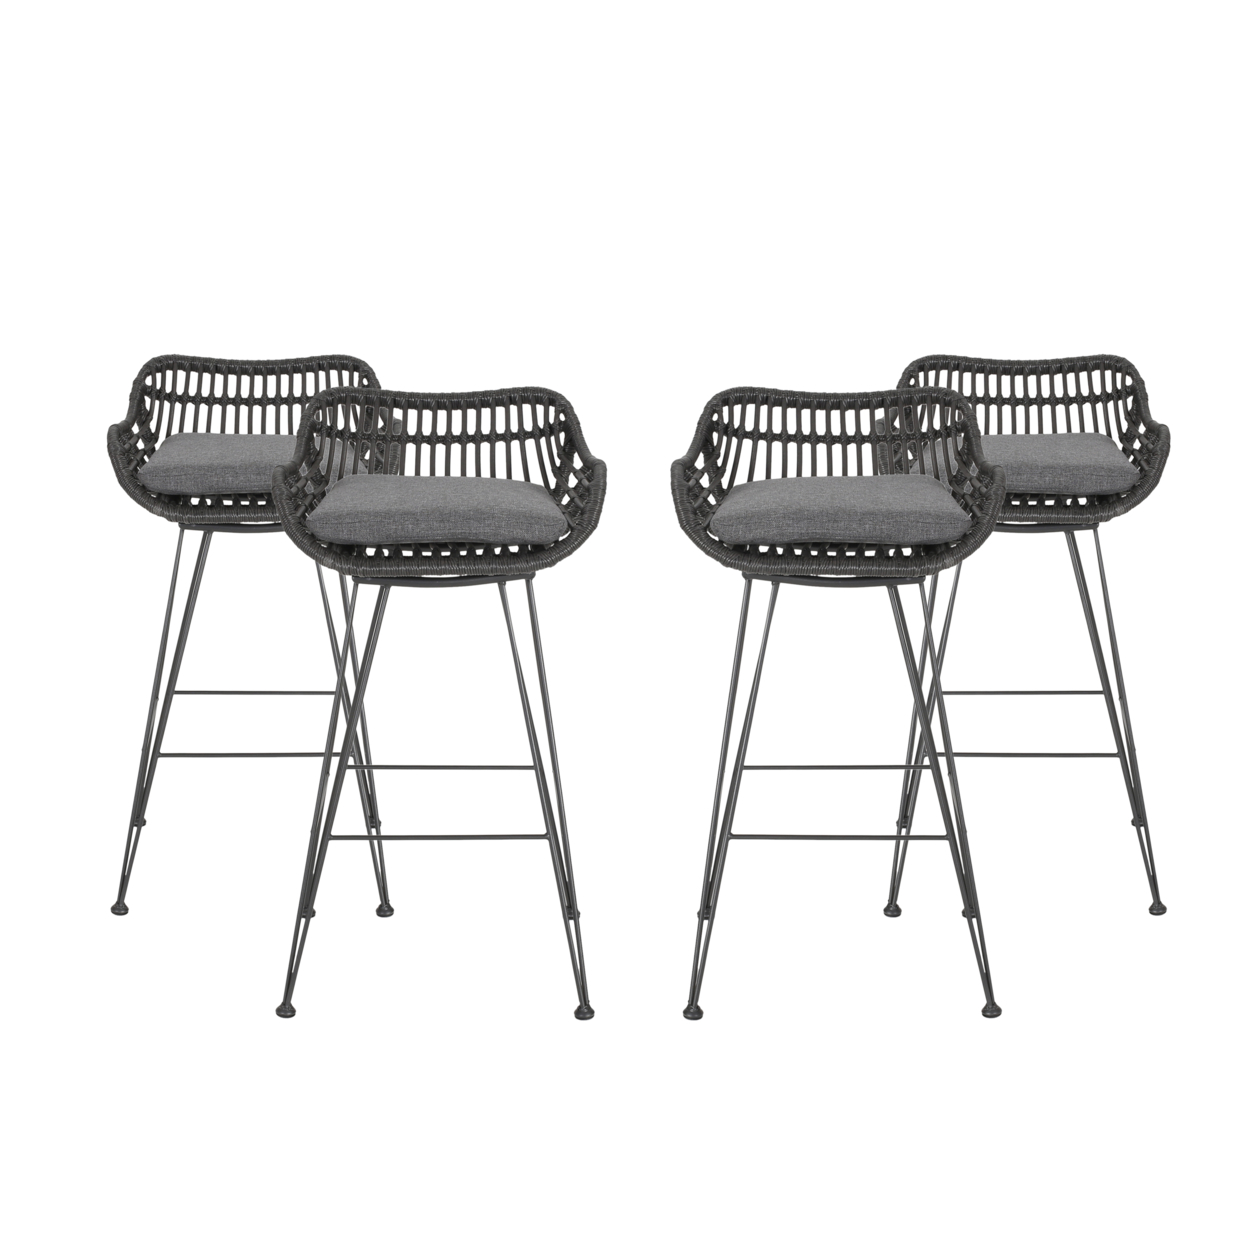 Candance Outdoor Wicker Barstools With Cushions (Set Of 4) - Gray, Black, Dark Gray